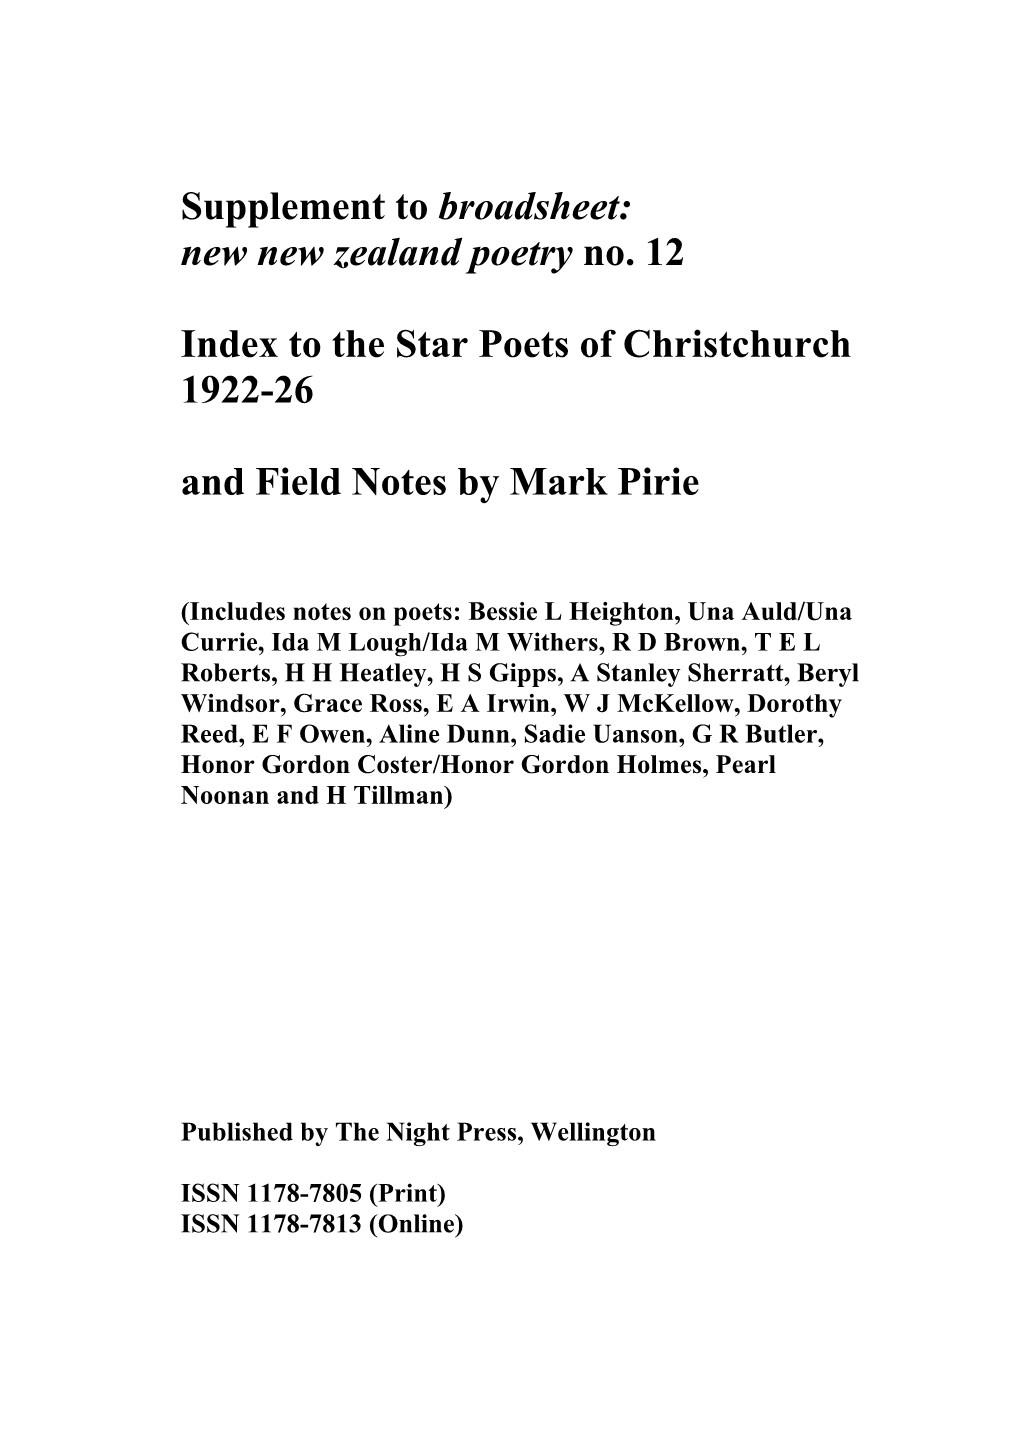 Chch Star Poets Index and Notes